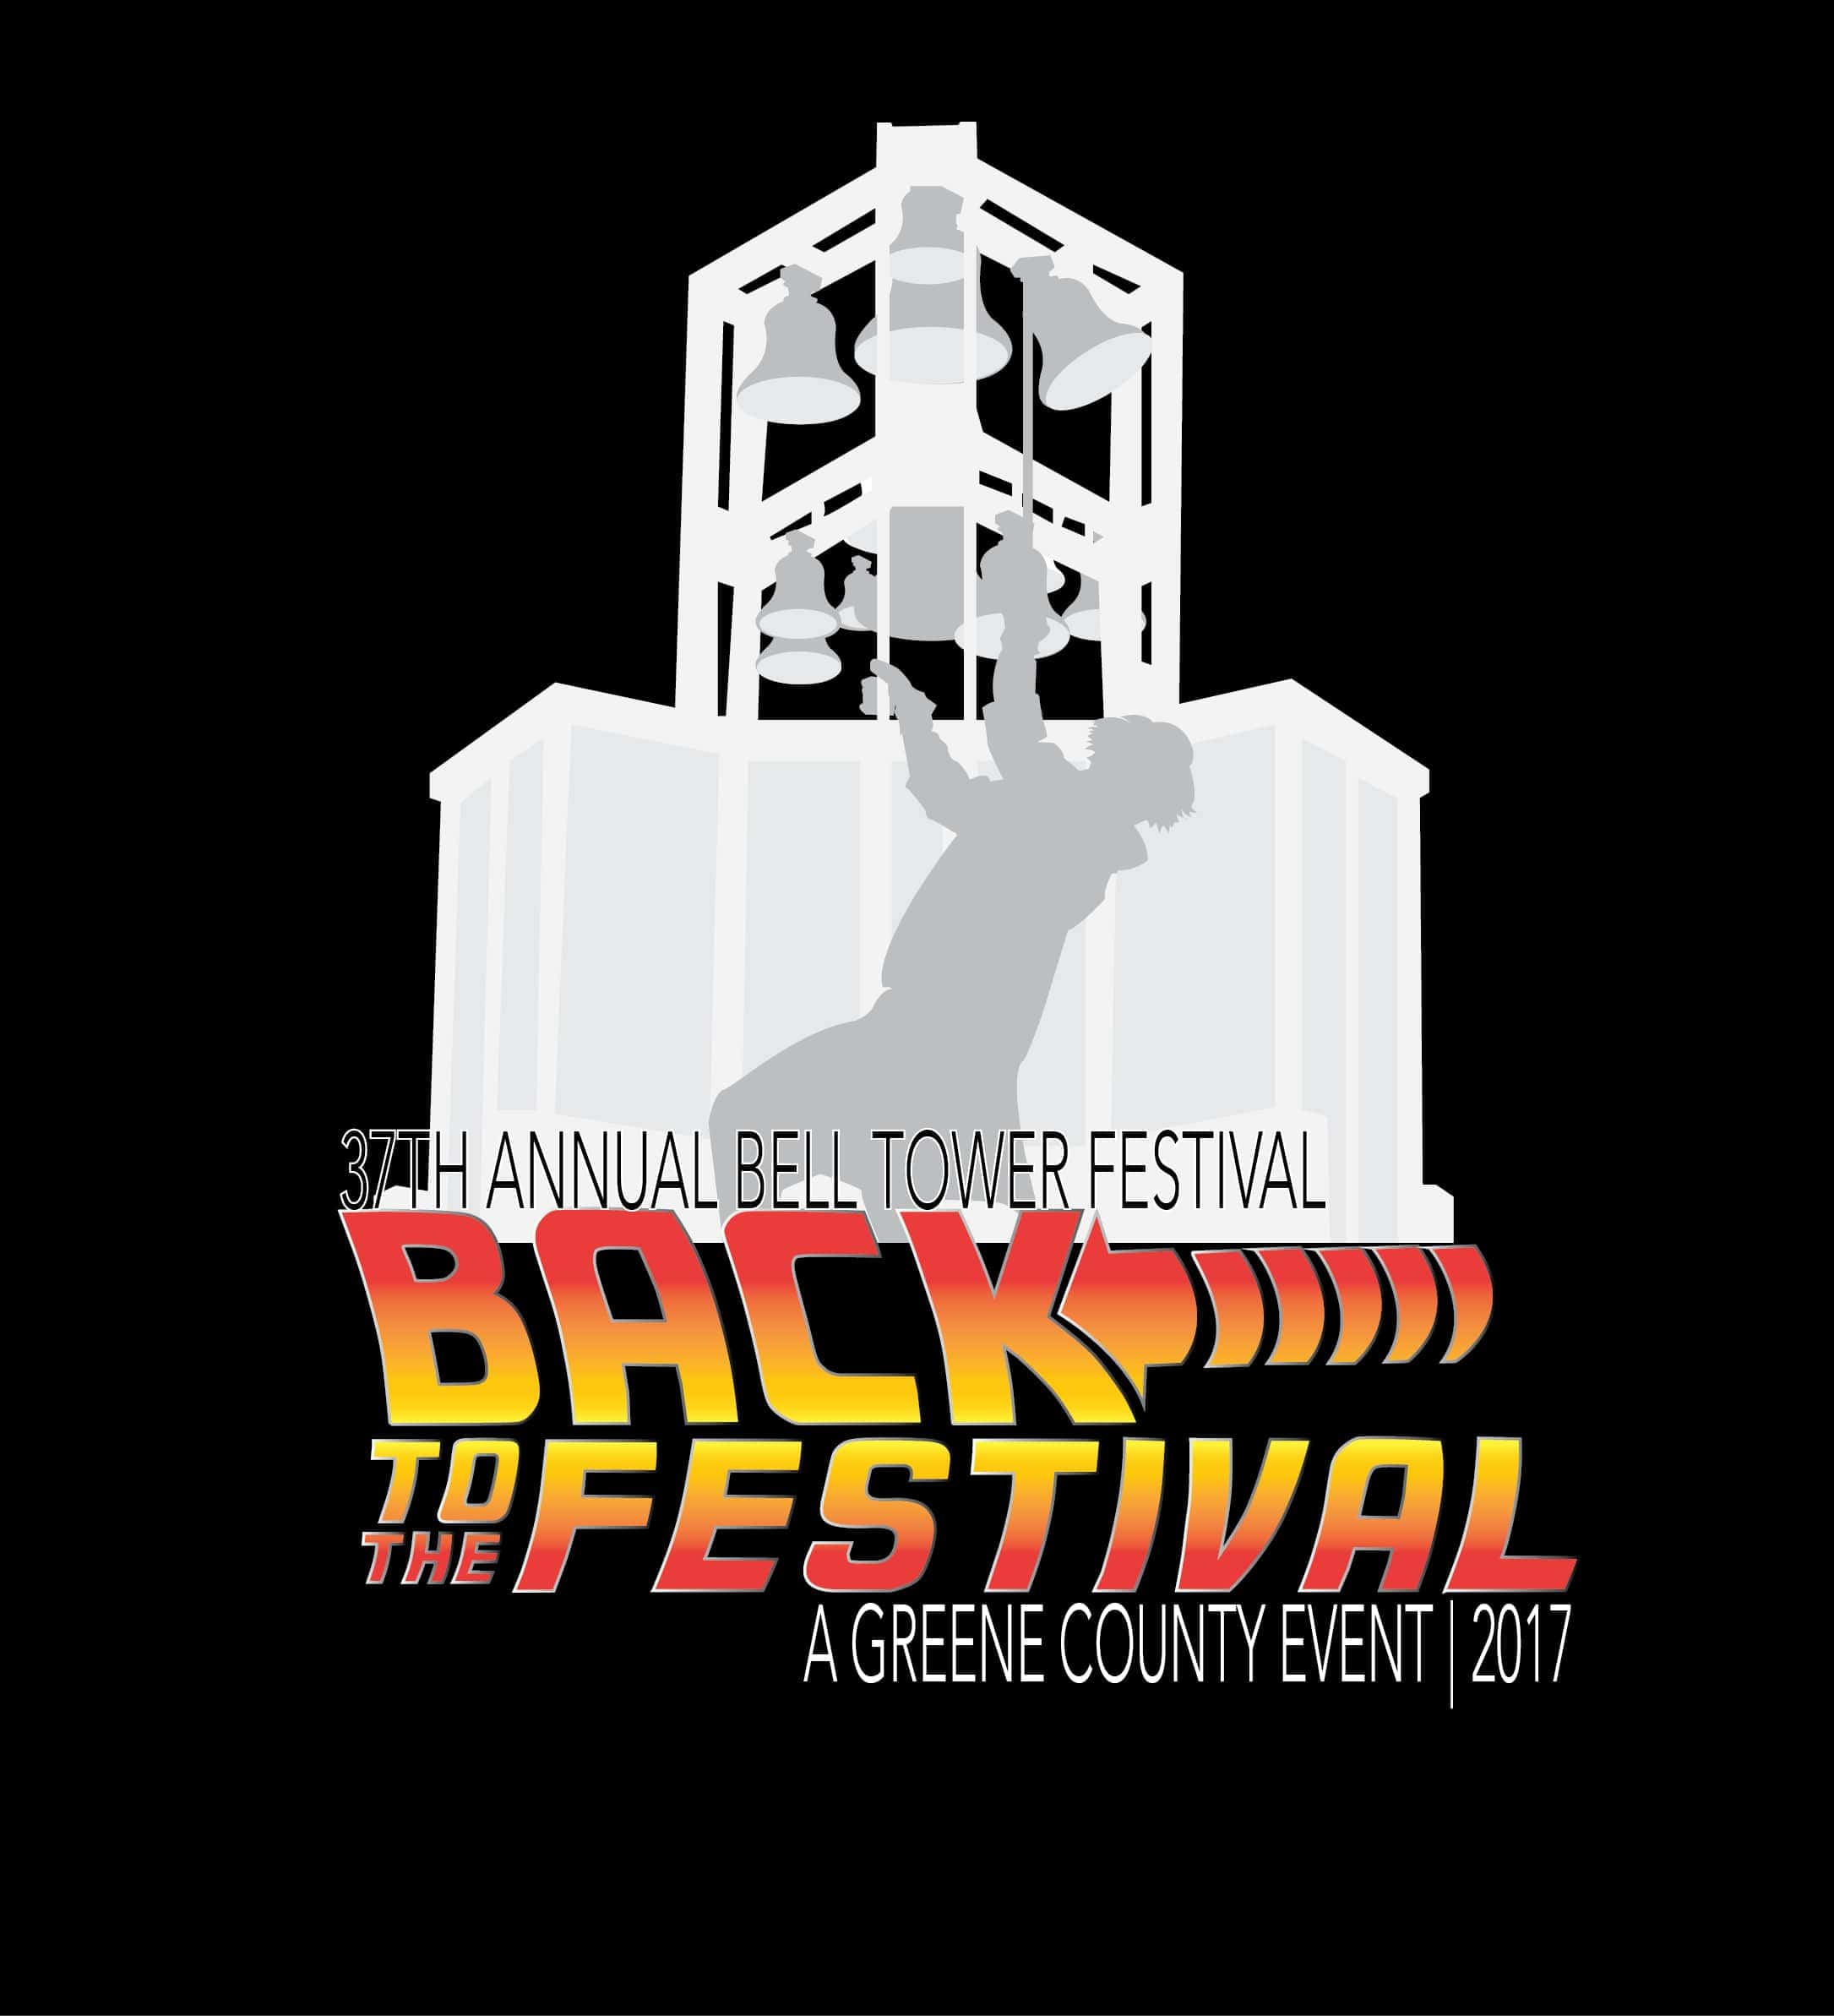 Full Slate of Activities Tomorrow at Bell Tower Festival | Raccoon